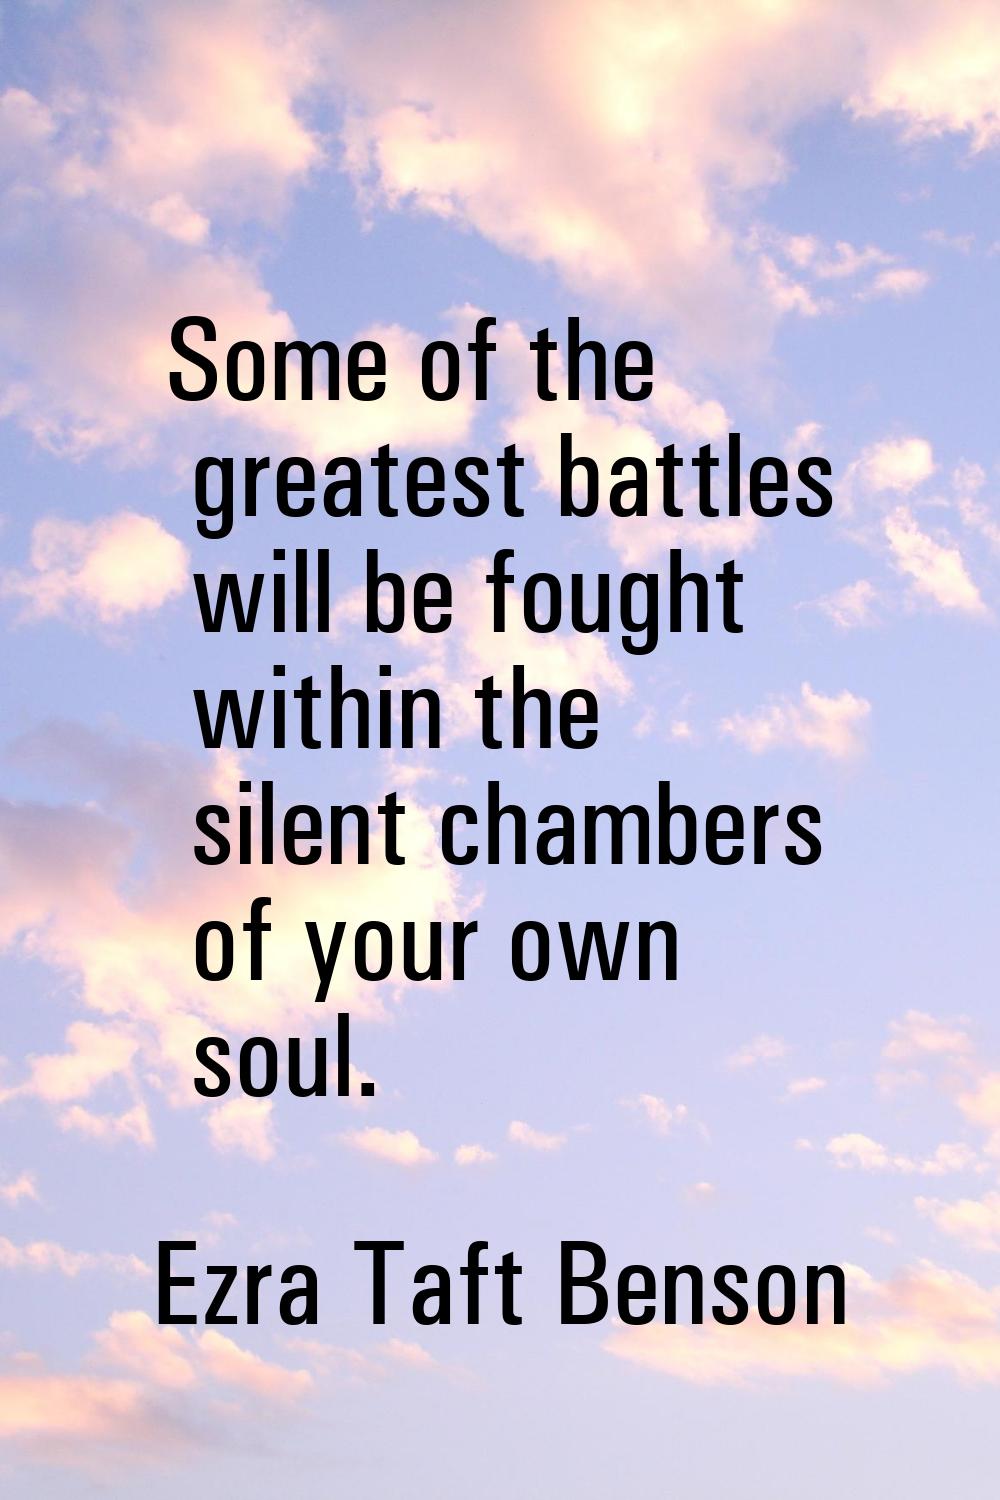 Some of the greatest battles will be fought within the silent chambers of your own soul.